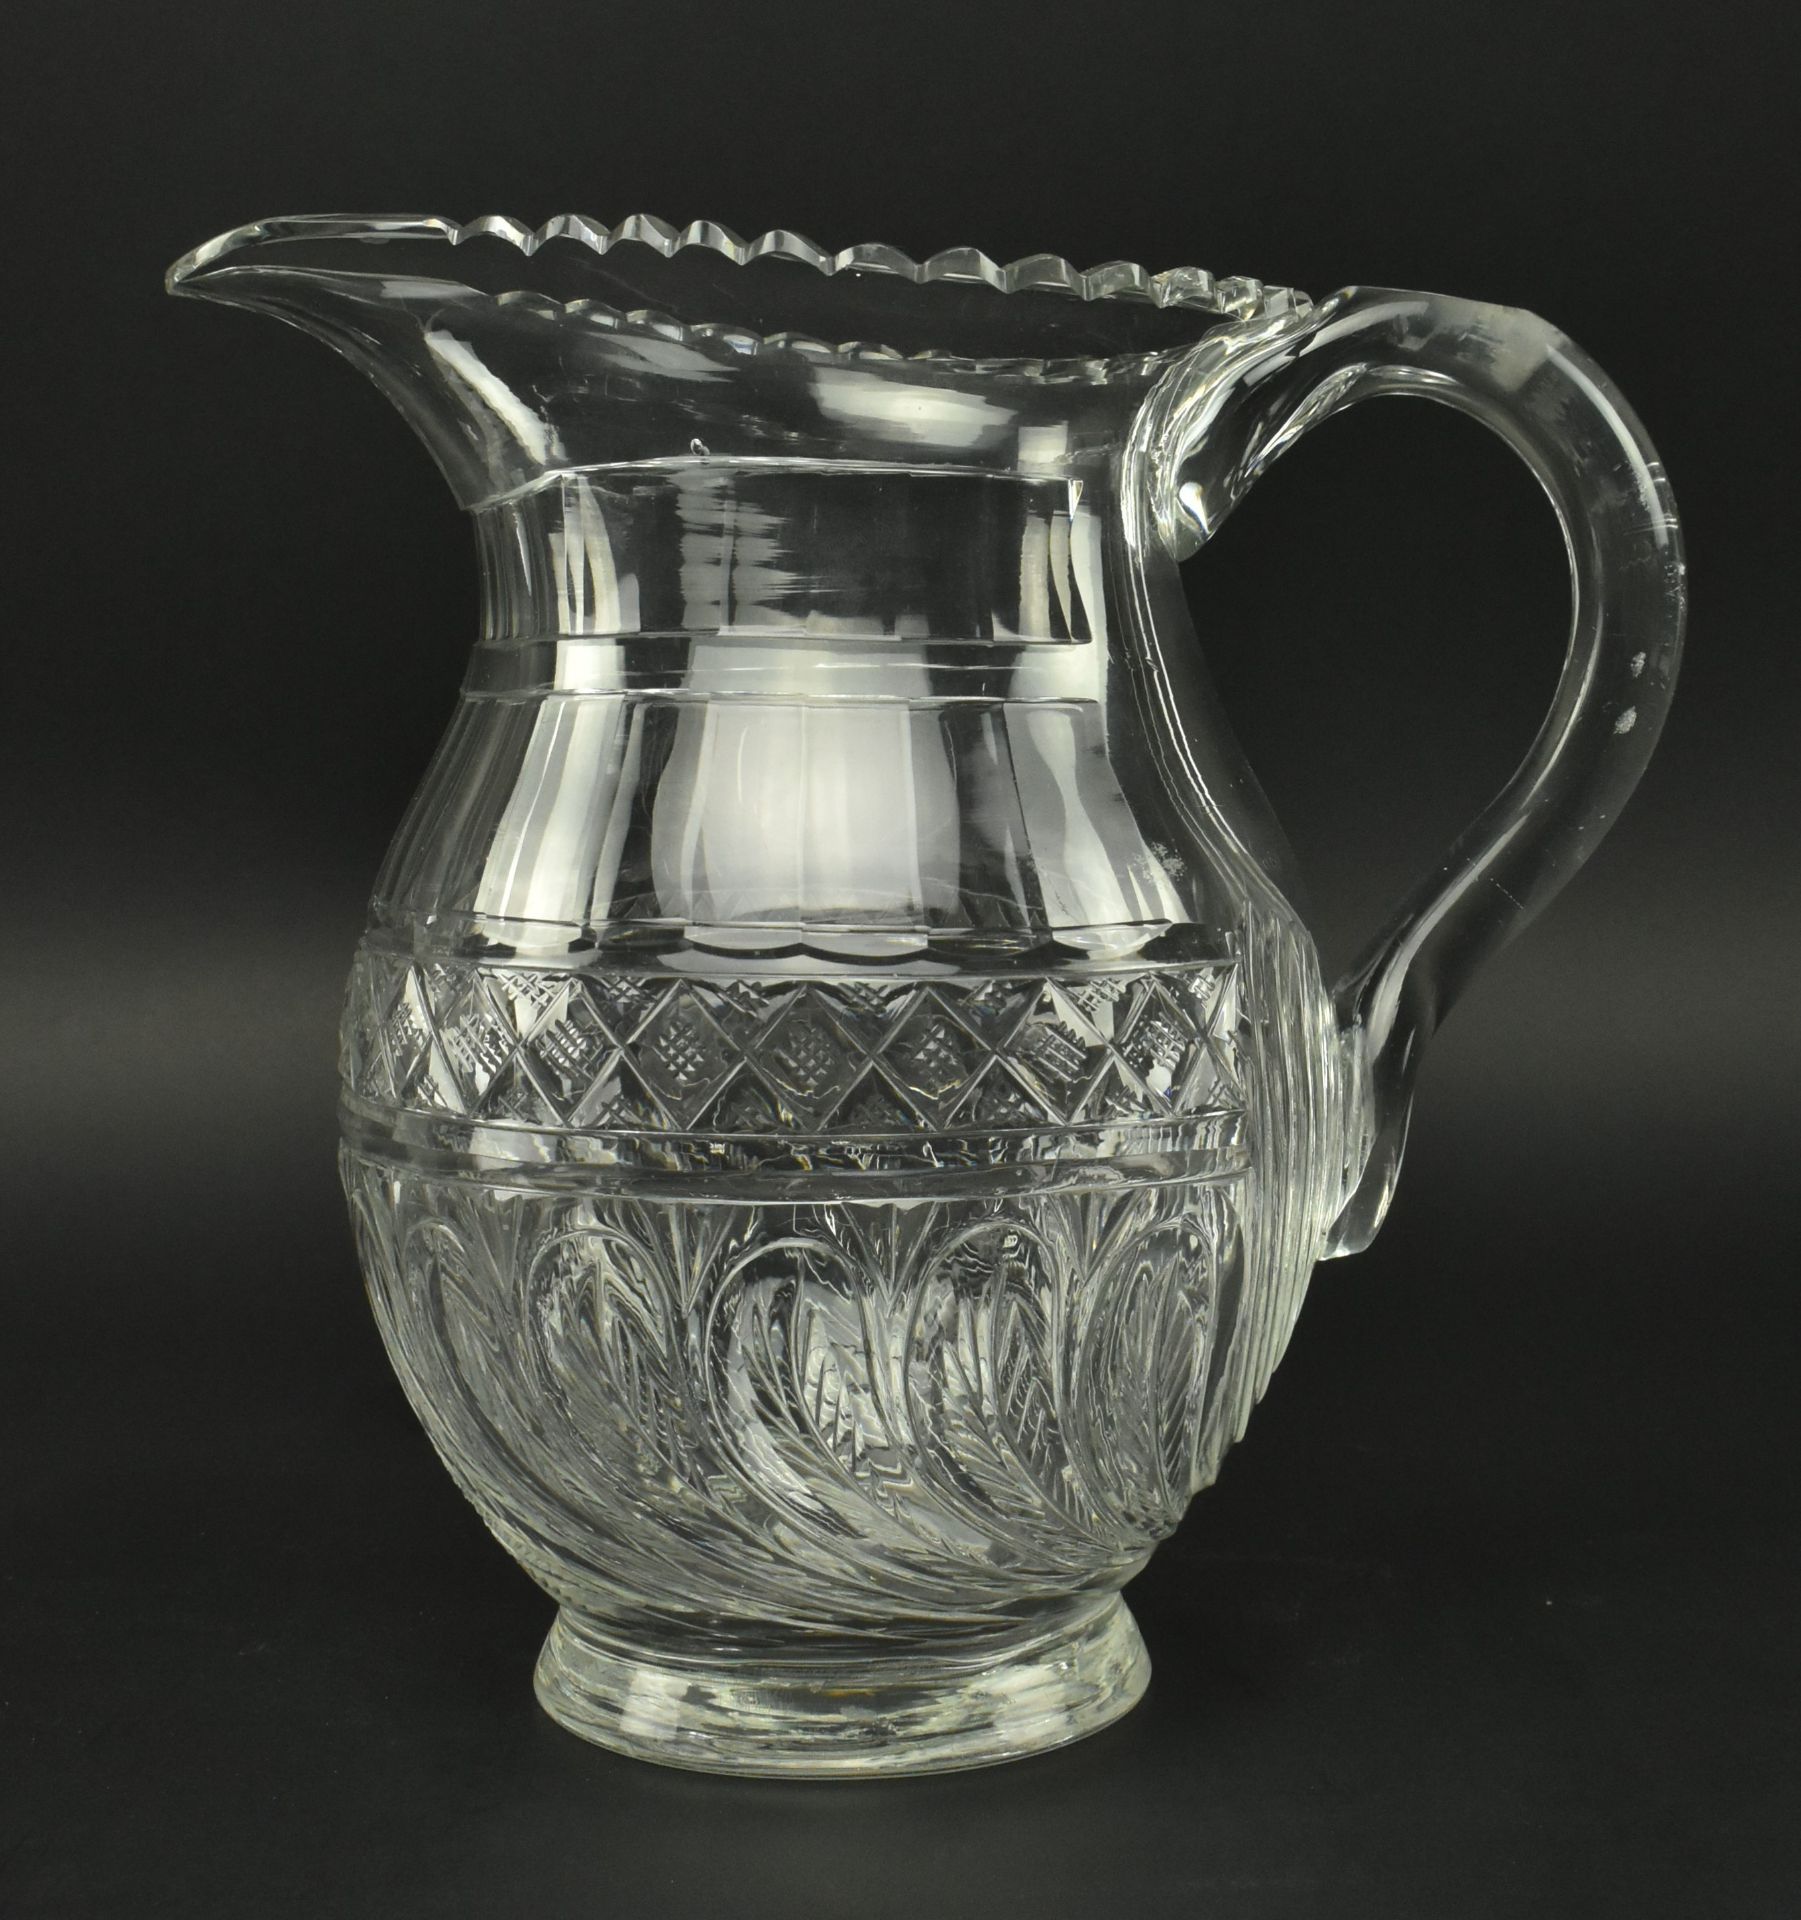 EARLY 19TH CENTURY GLASS WATER JUG, FEATHERED DESIGN